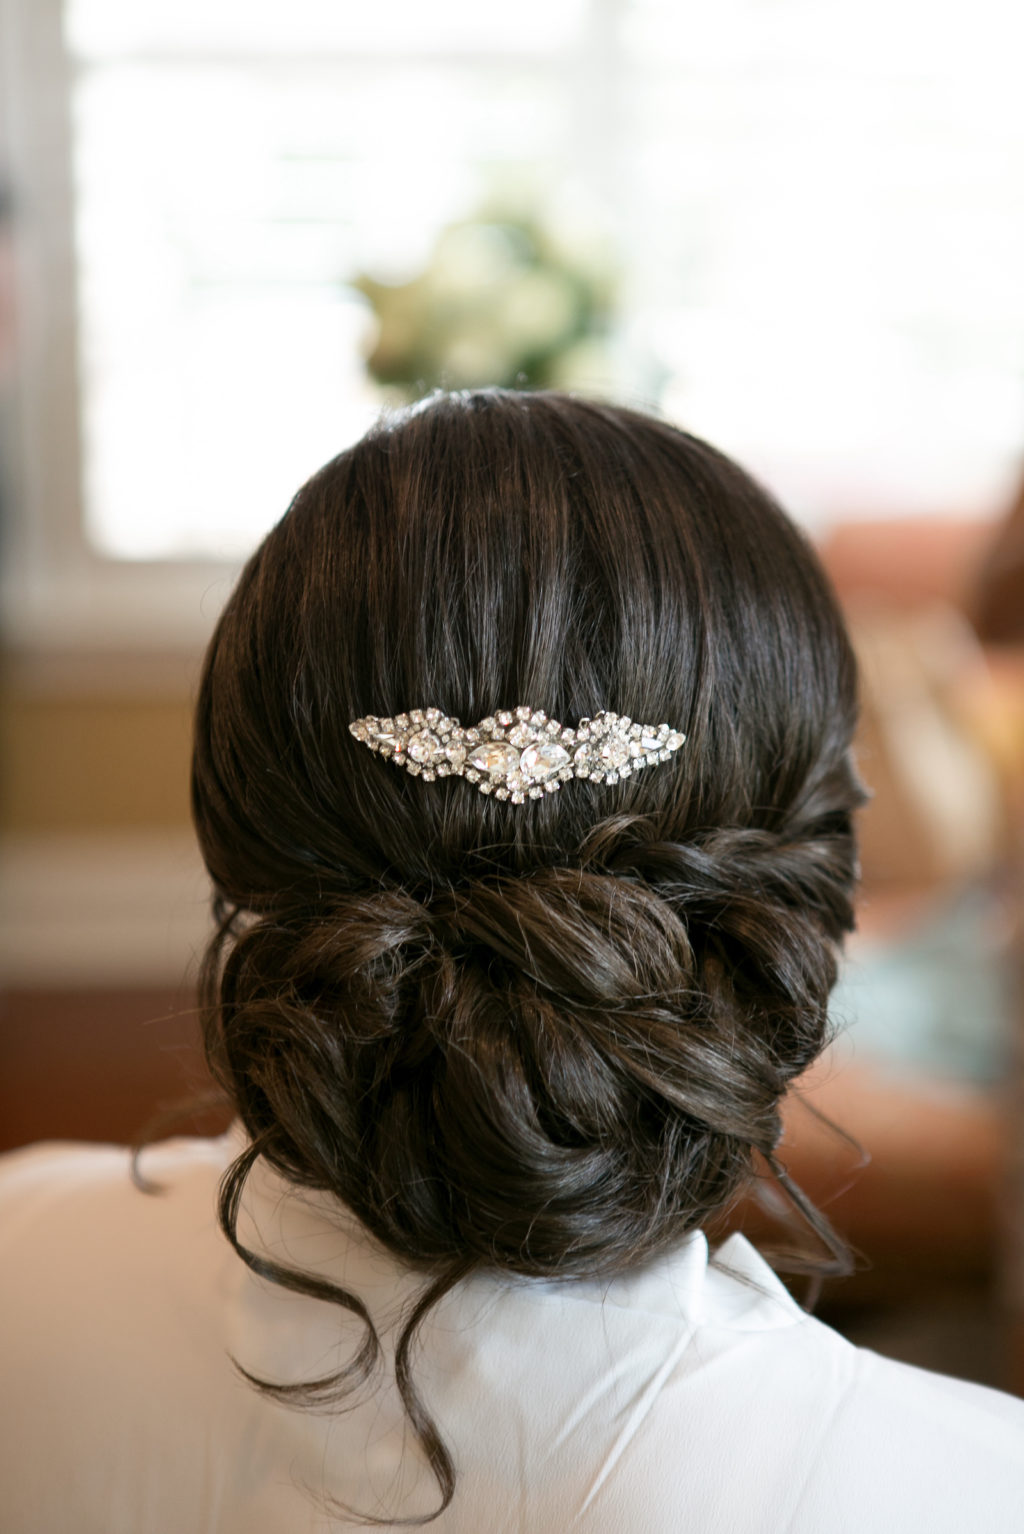 Wedding Bridal Hair Style Inspiration | Low Loose Chignon Bun with Loose Curls and Rhinestone Comb | Tampa Hair and Makeup Artist Michele Renee The Studio